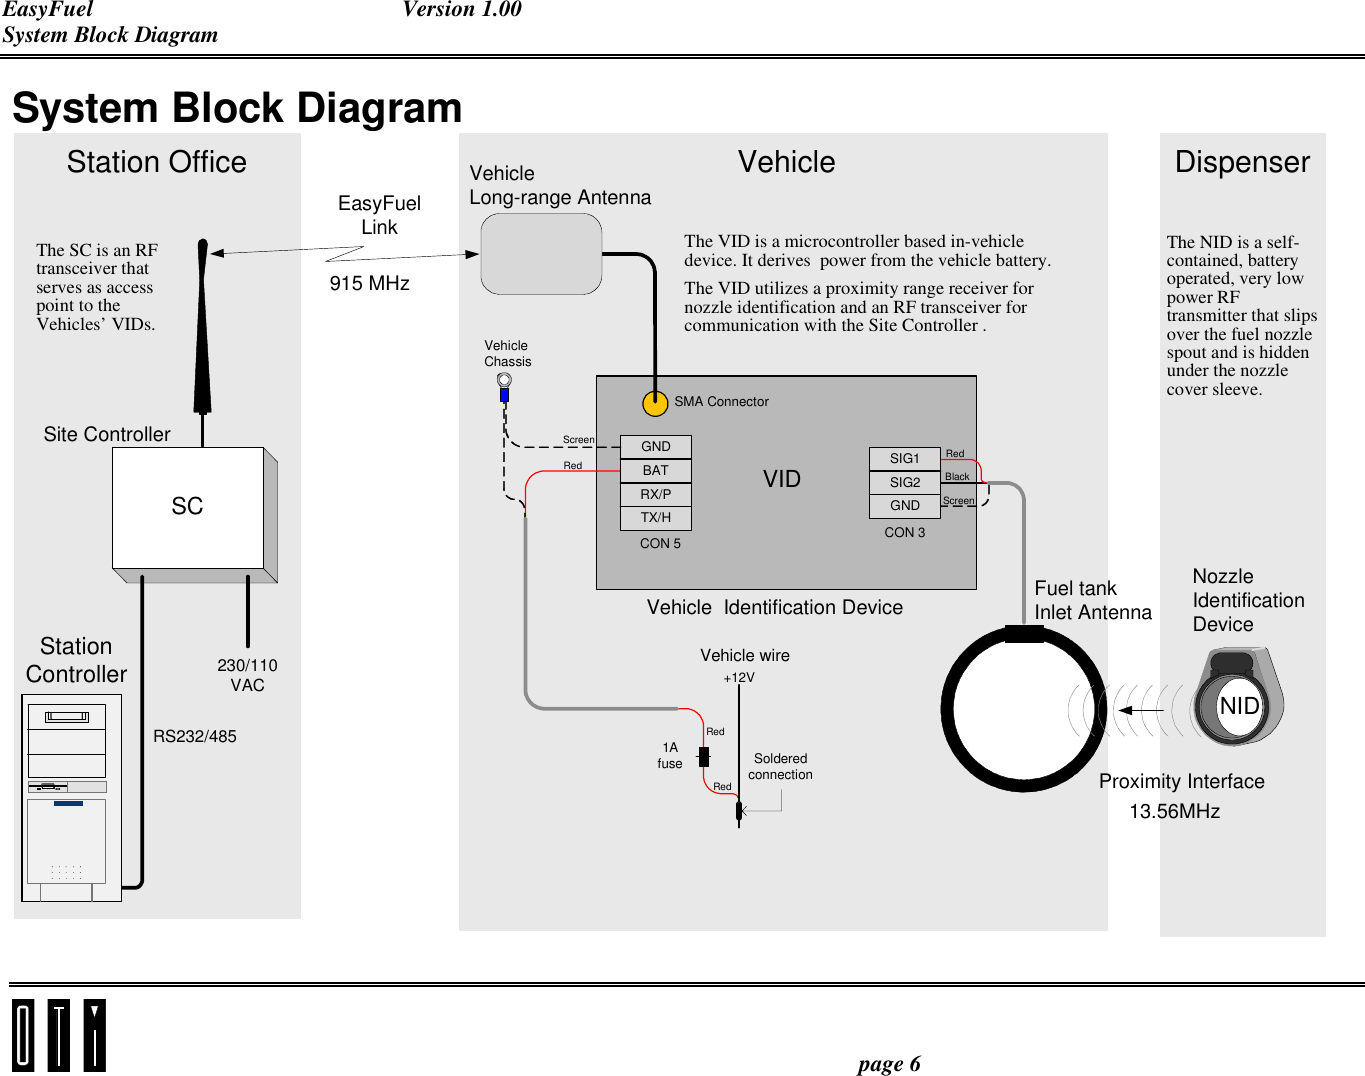 EasyFuel Version 1.00 System Block Diagram    page 6 System Block Diagram GNDBATRX/PTX/HSIG1SIG2GNDSMA ConnectorCON 5 CON 3VIDRedBlackScreenVehicleChassisScreenRed+12VRed1Afuse SolderedconnectionRedVehicle wireVehicle  Identification DeviceVehicleLong-range AntennaFuel tankInlet AntennaNIDNozzleIdentificationDevice13.56MHzSCSite ControllerStationController230/110VAC915 MHzThe SC is an RFtransceiver thatserves as accesspoint to theVehicles’ VIDs.The VID is a microcontroller based in-vehicledevice. It derives  power from the vehicle battery.The VID utilizes a proximity range receiver fornozzle identification and an RF transceiver forcommunication with the Site Controller .Proximity InterfaceEasyFuelLinkThe NID is a self-contained, batteryoperated, very lowpower RFtransmitter that slipsover the fuel nozzlespout and is hiddenunder the nozzlecover sleeve.Vehicle DispenserStation OfficeRS232/485